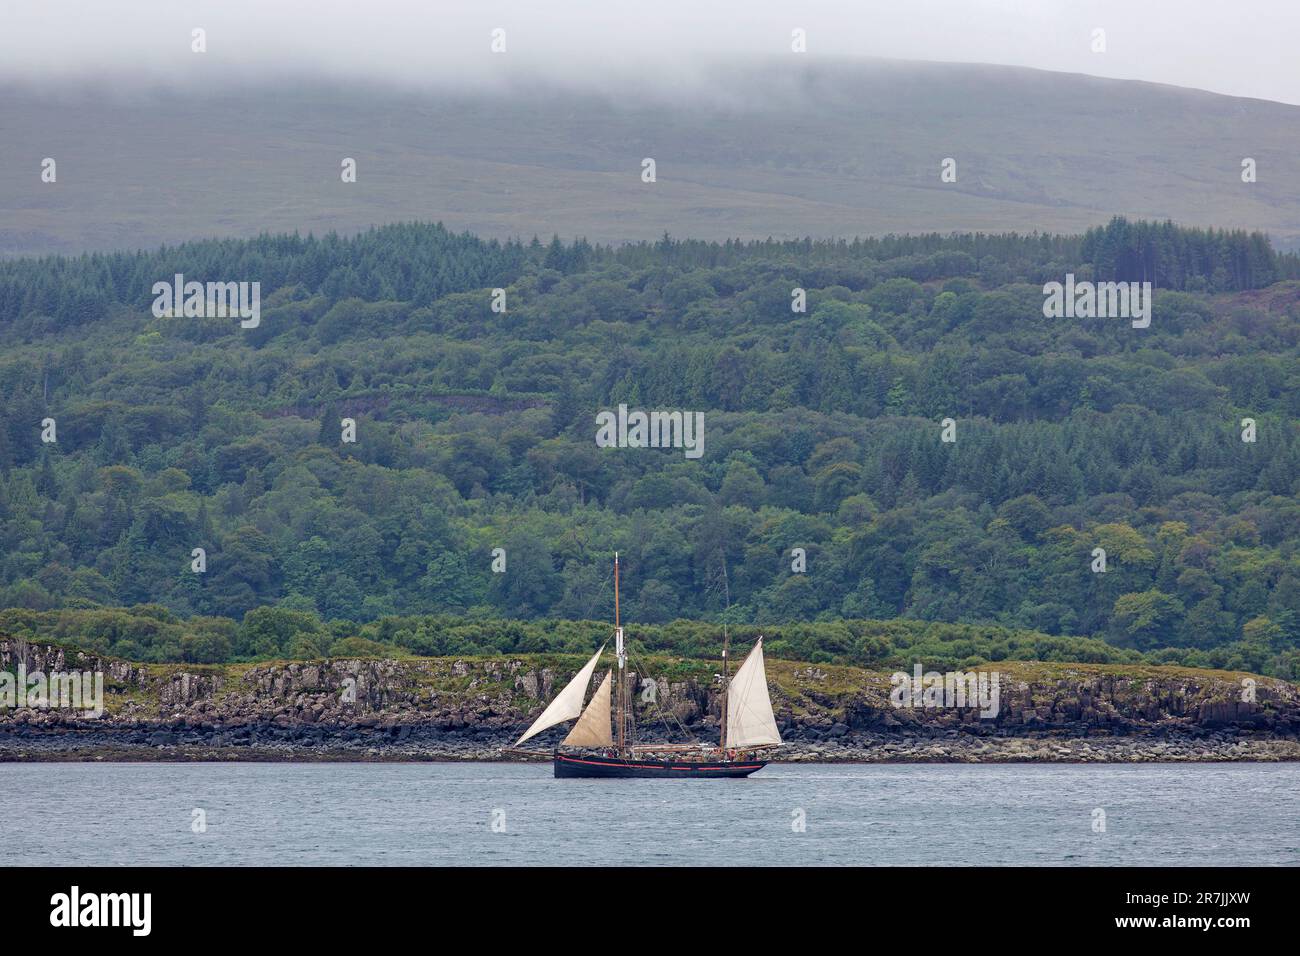 Large Classic Two-masted Sailboat in the Sound of Mull near to the Coast, Isle of Mull, Inner Hebrides, Inner Isles, Scotland, United Kingdom Stock Photo